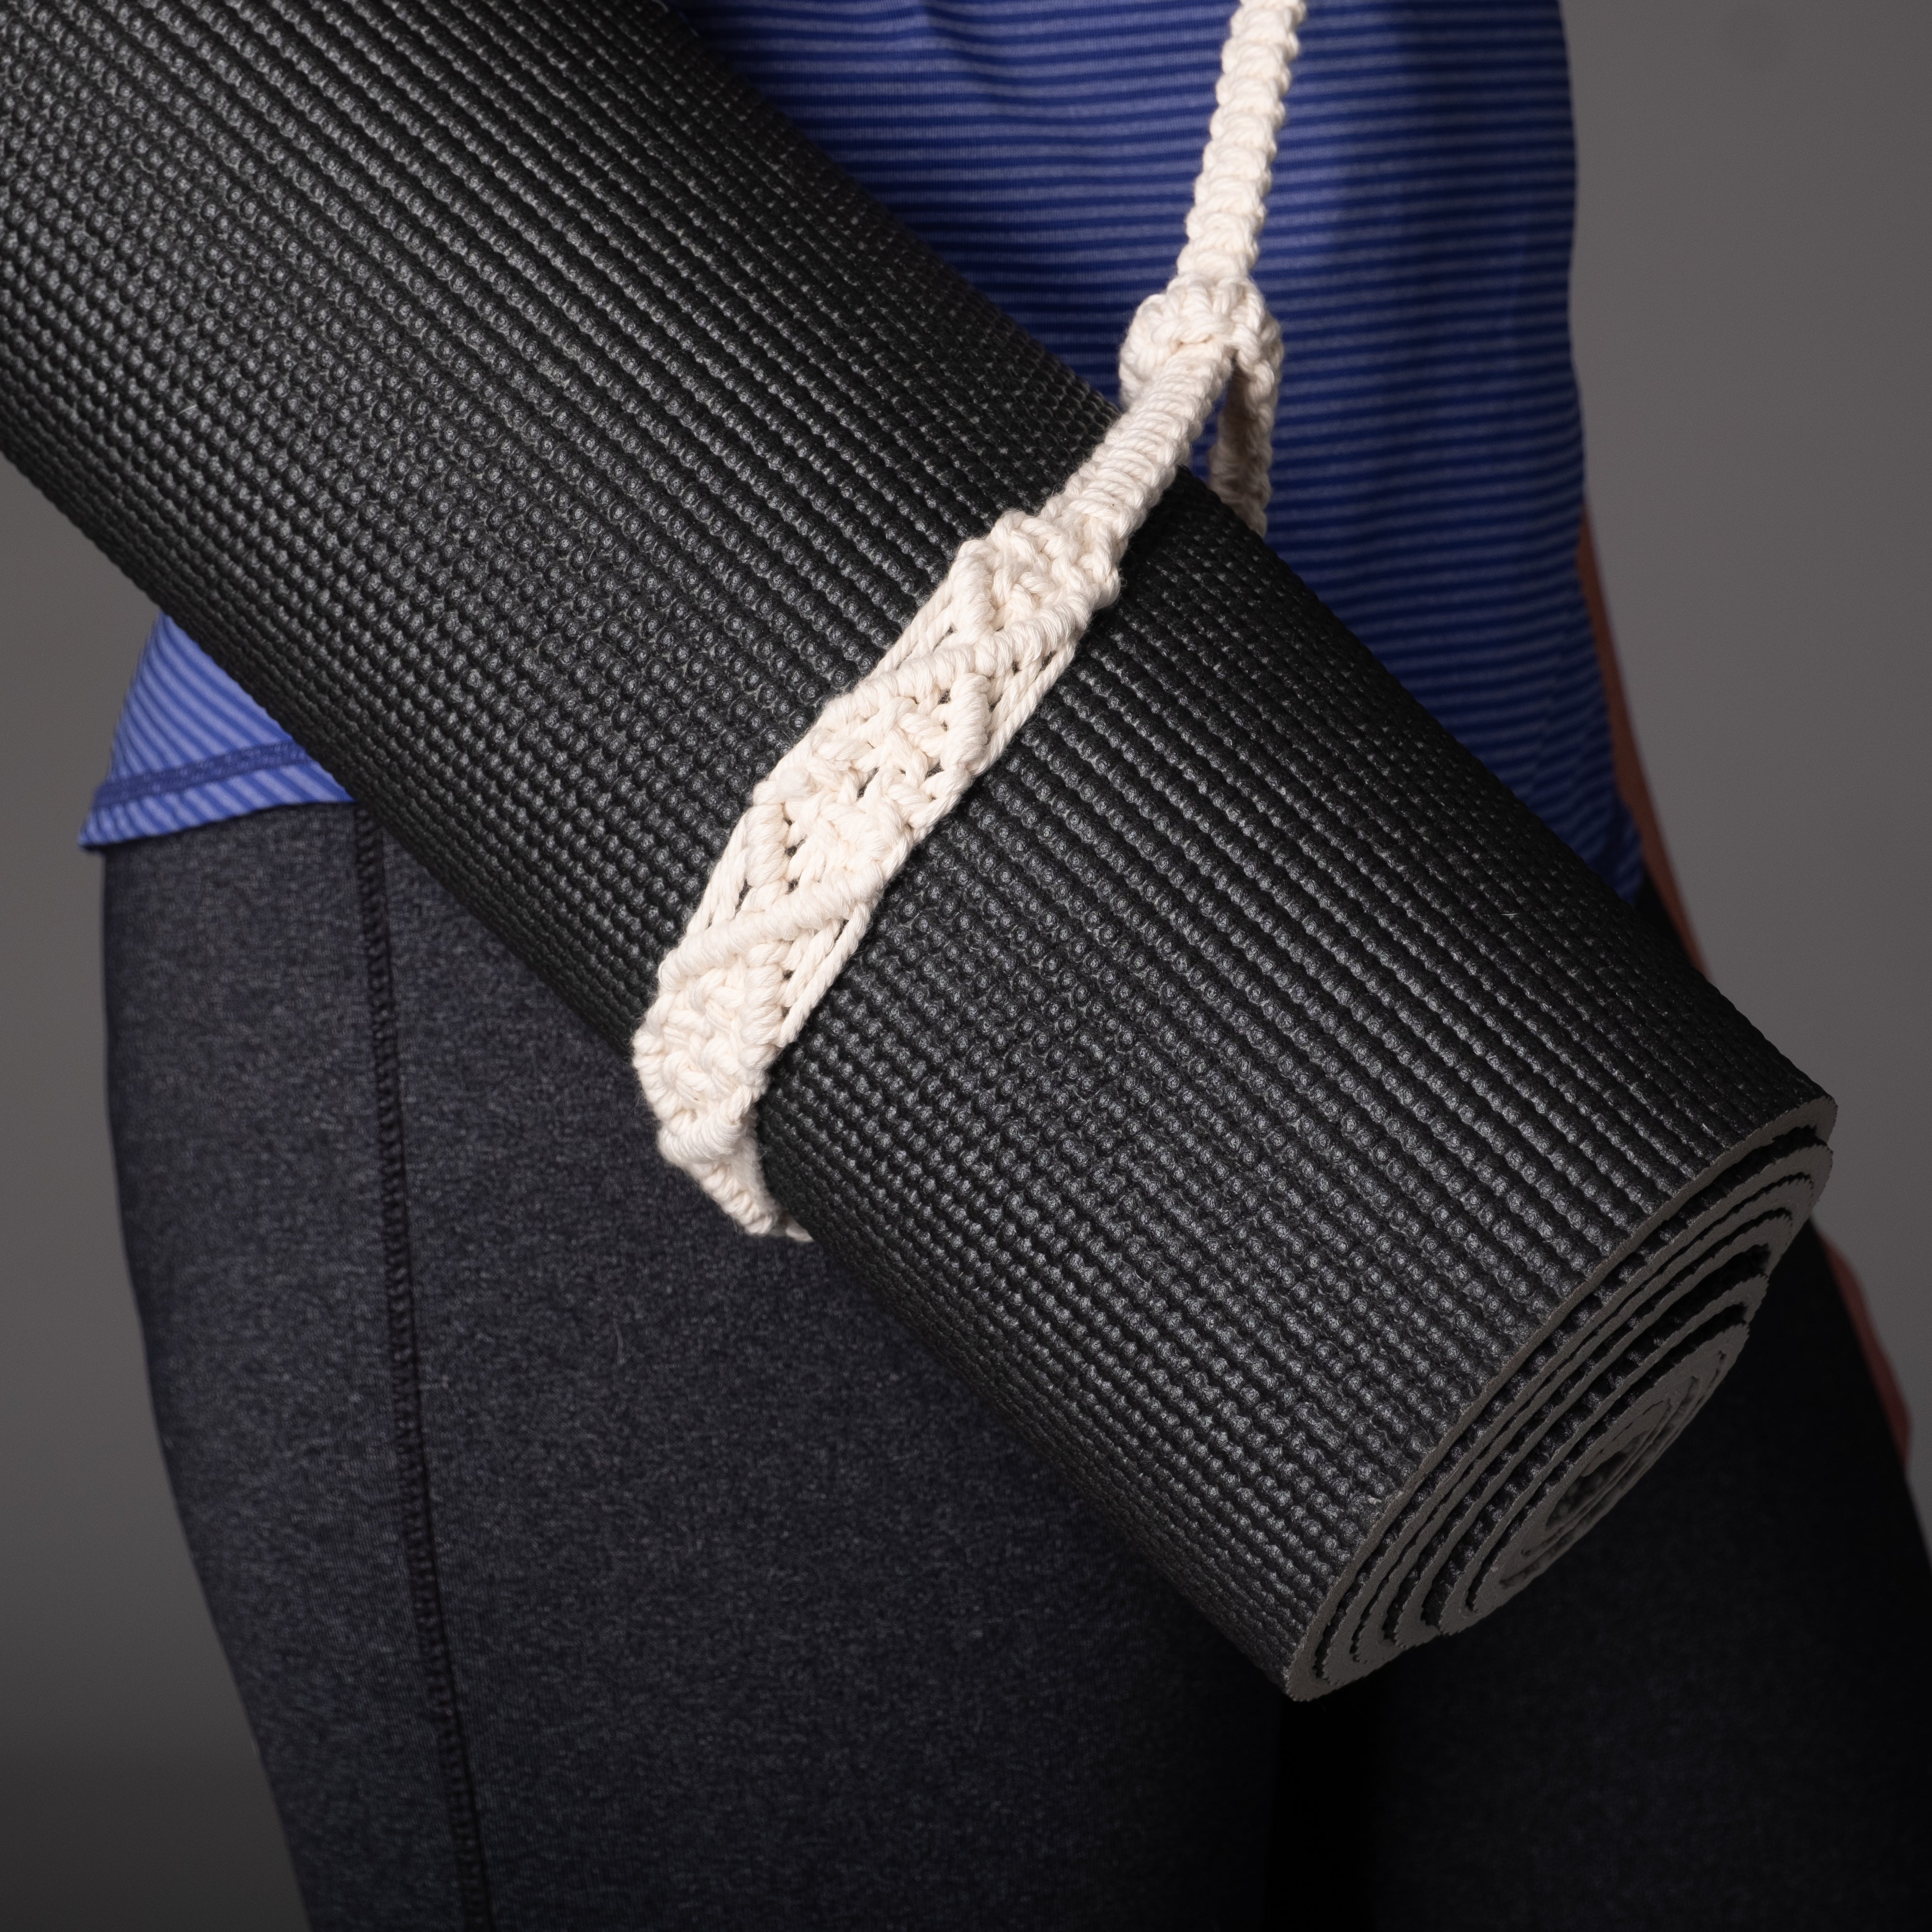 kiido Macrame Yoga Mat Carrying Strap MAT NOT Included, Hand Woven